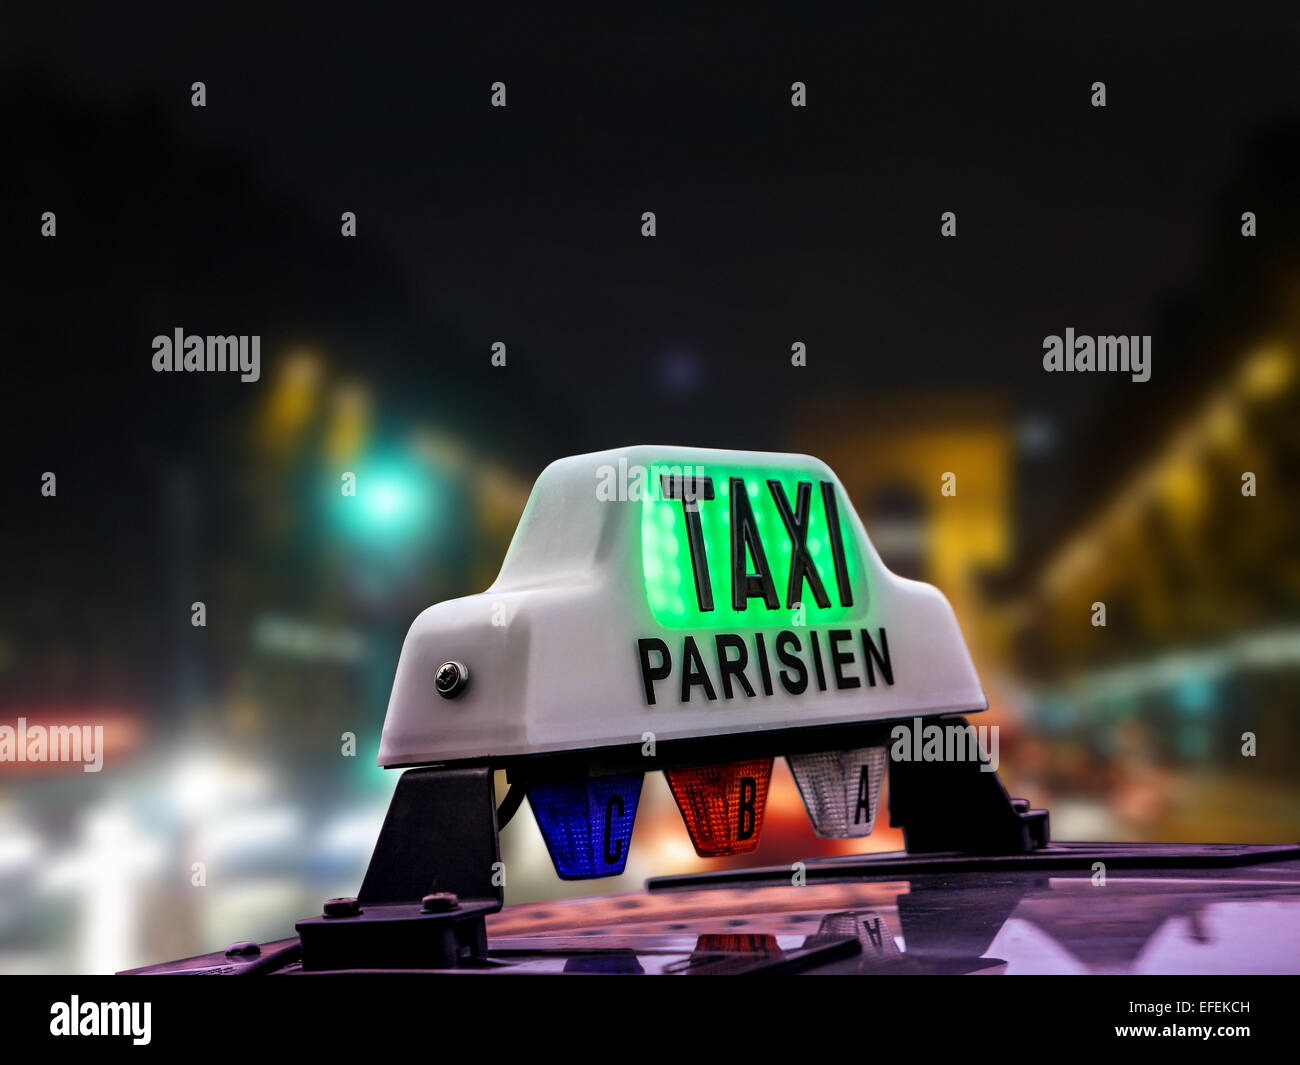 Closeup of Parisian taxi cab against the blurred Champs Elysees at night, Paris, France Stock Photo